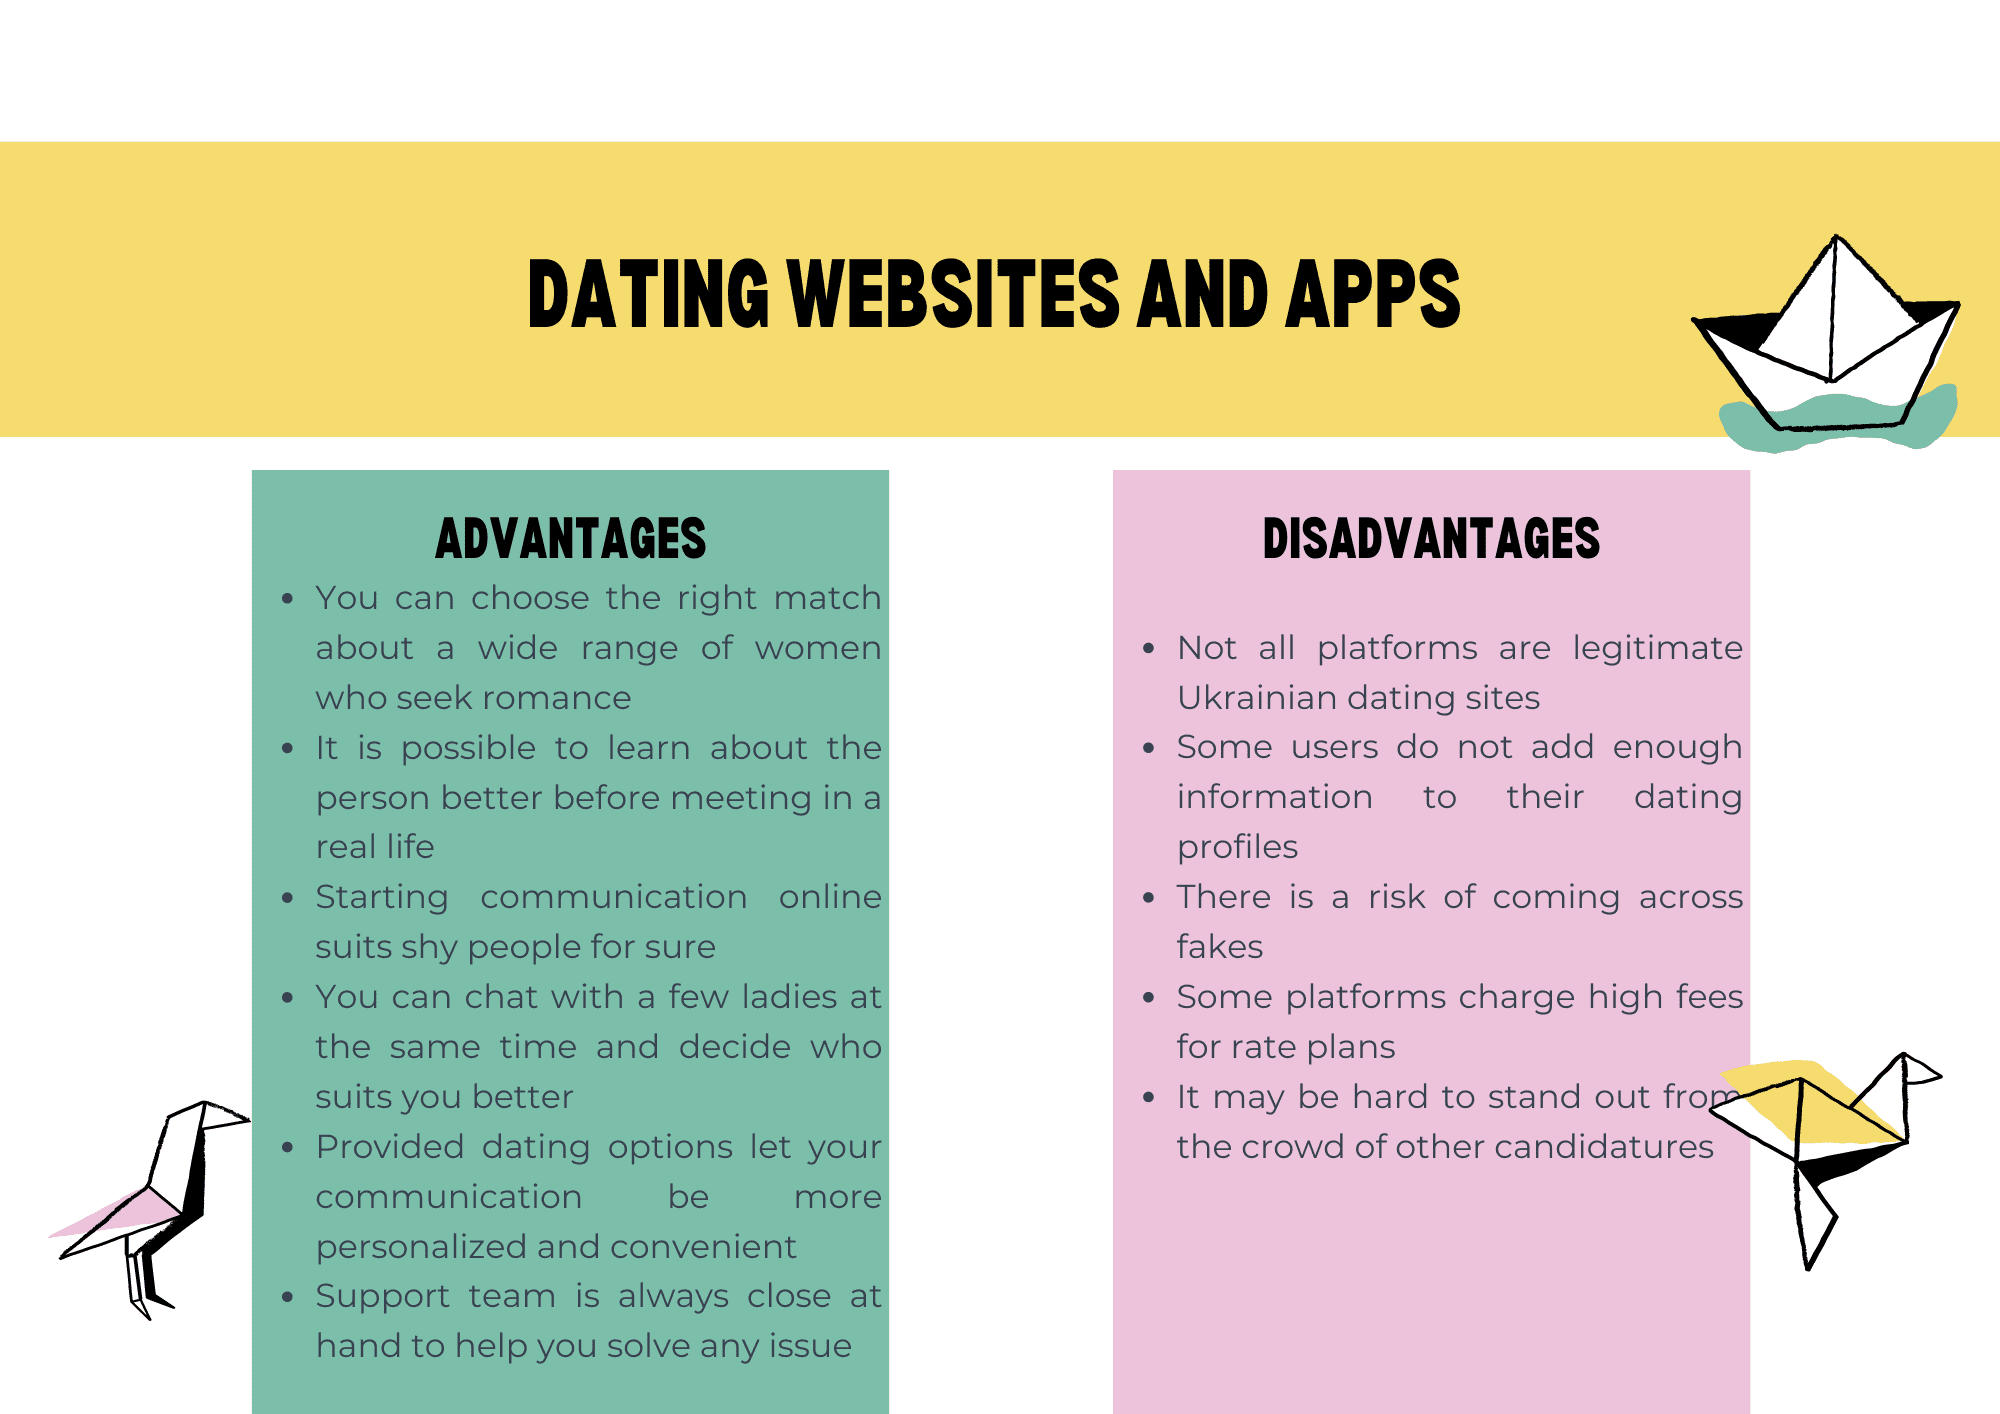 dating website and apps infographic